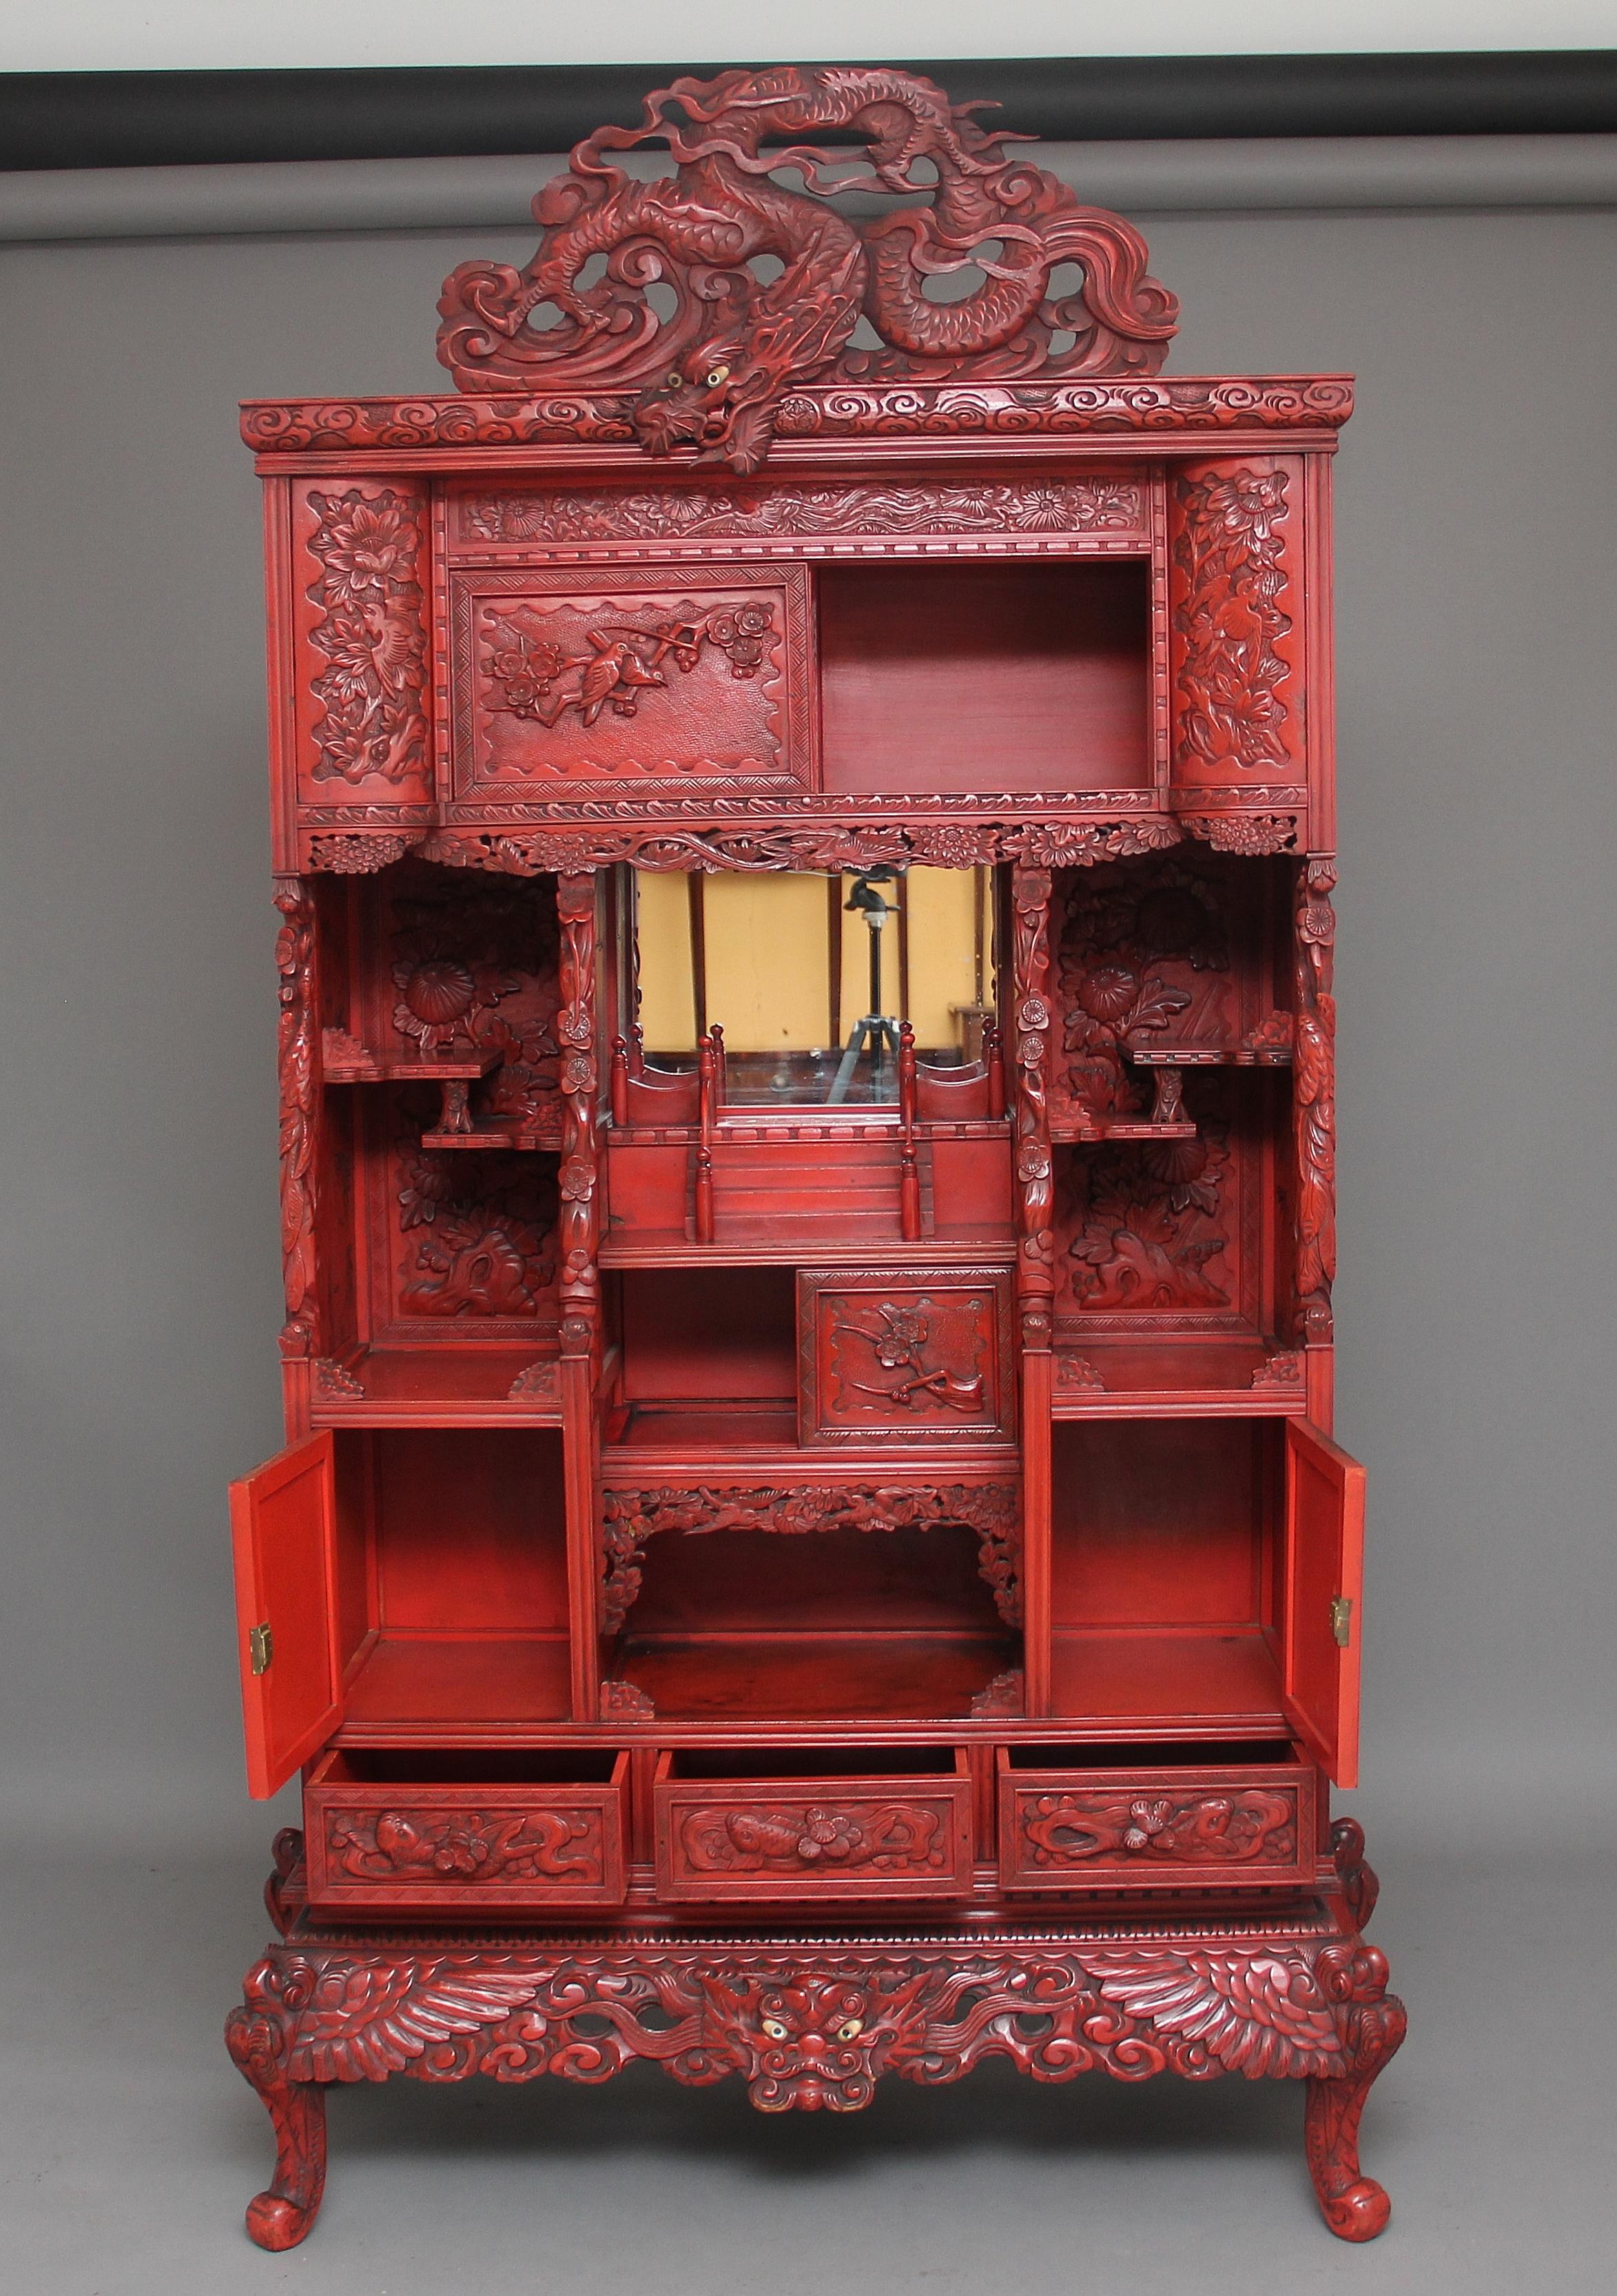 A highly decorative 19th century red lacquered Japanese shodona cabinet, having a large dragon pediment above the cabinet with the head looking over the carved cornice, the cabinet consisting of various shelves, hinged and sliding doors, with three